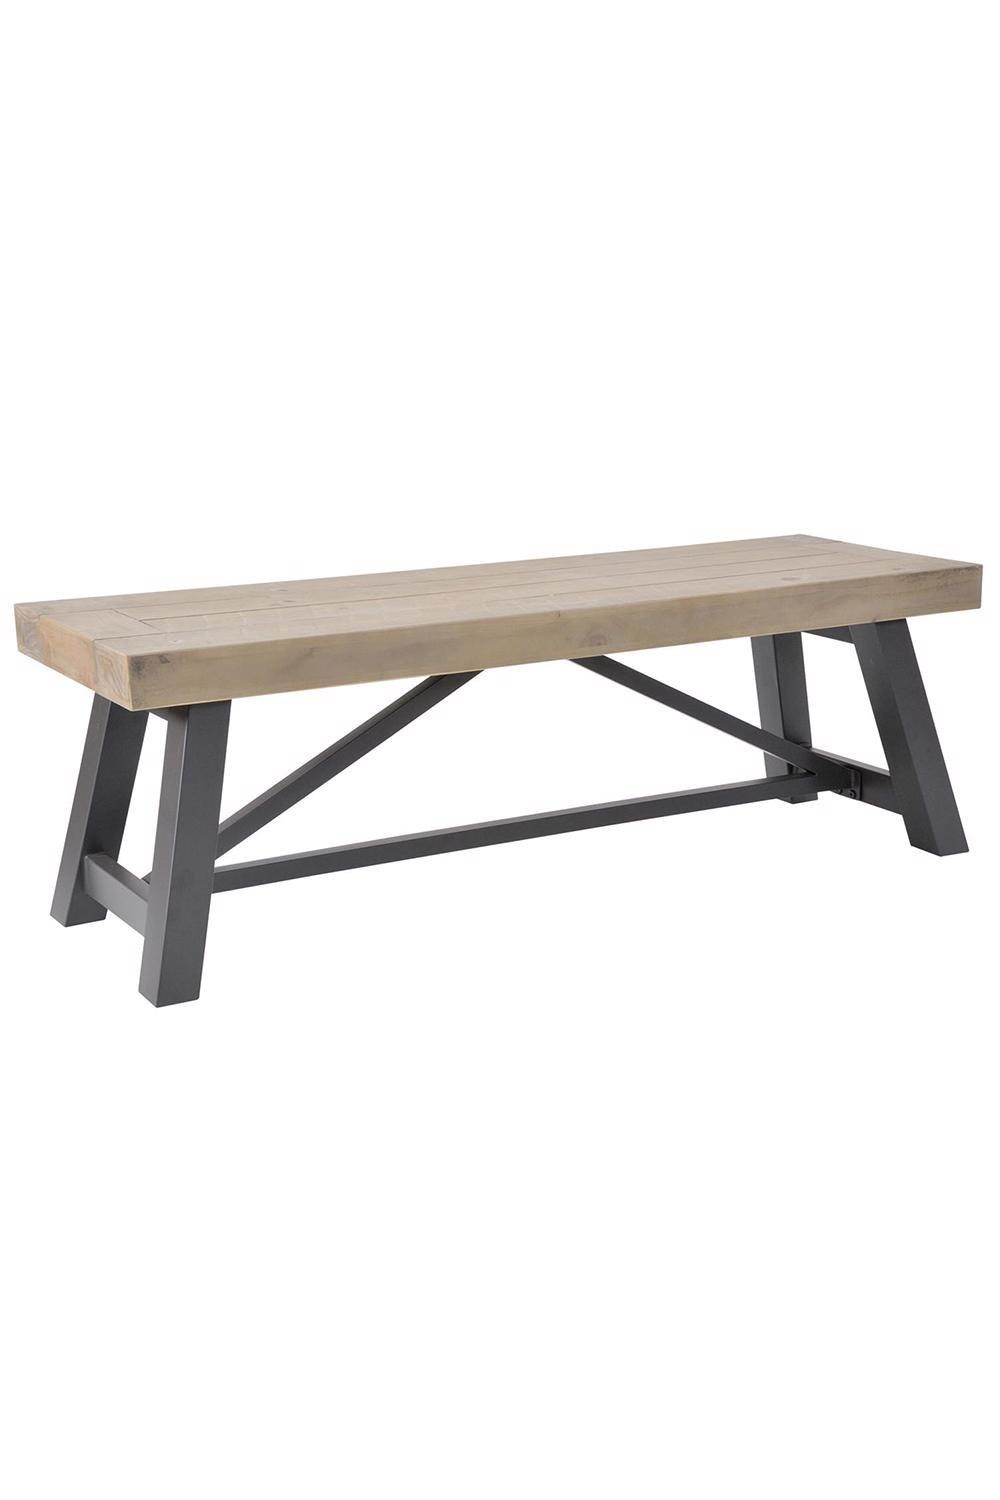 1.69m Solid Reclaimed Pine Grey Wash Dining Bench